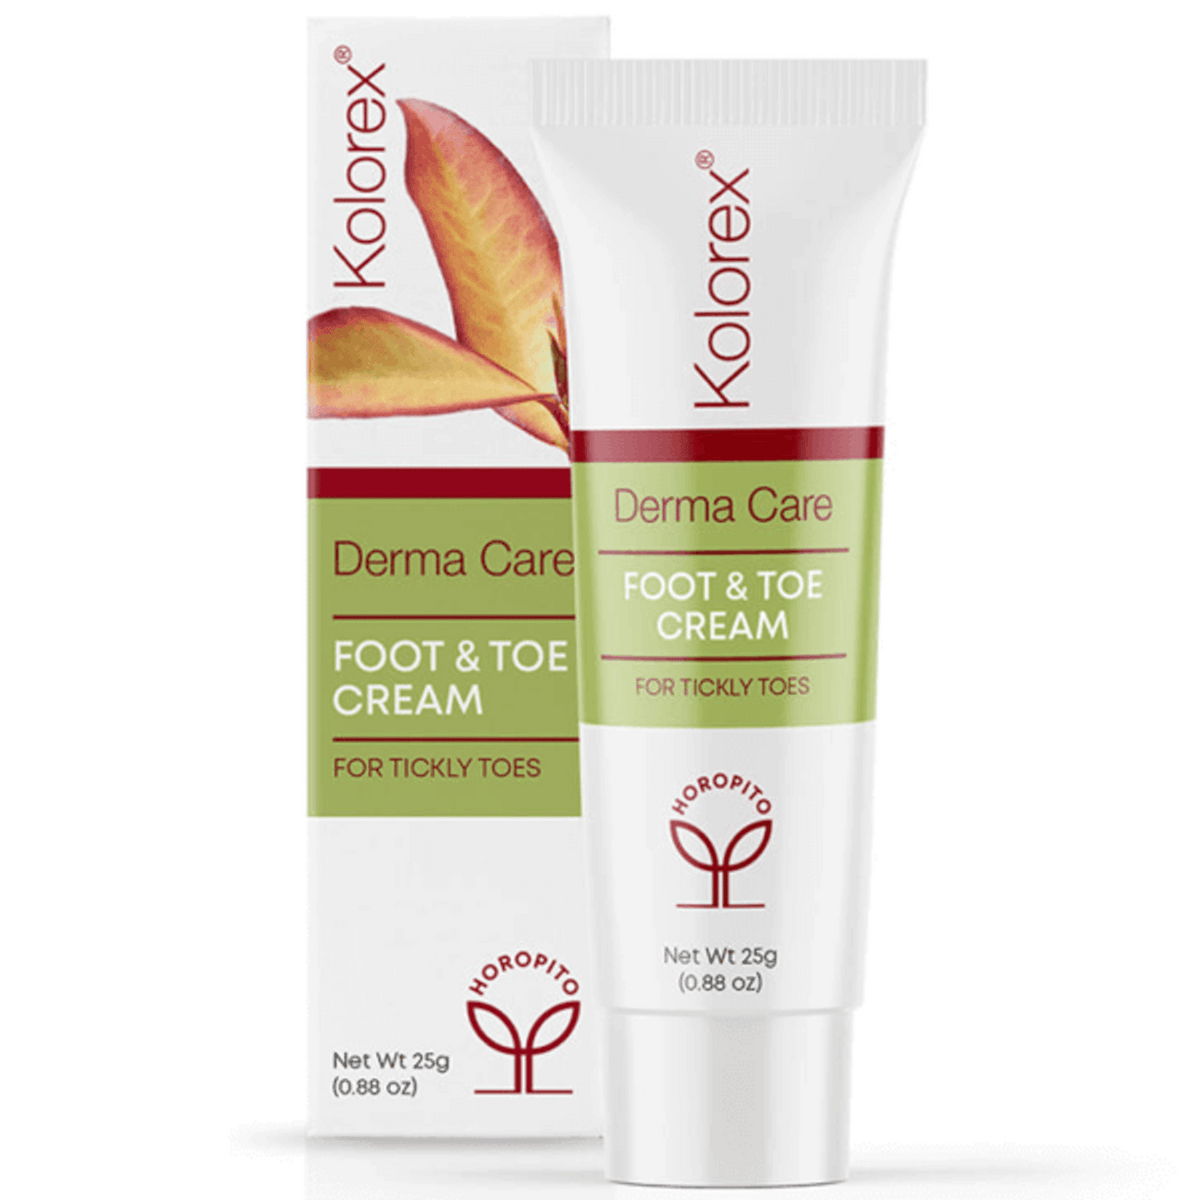 Primary Image of Derma Care Foot and Toe Cream